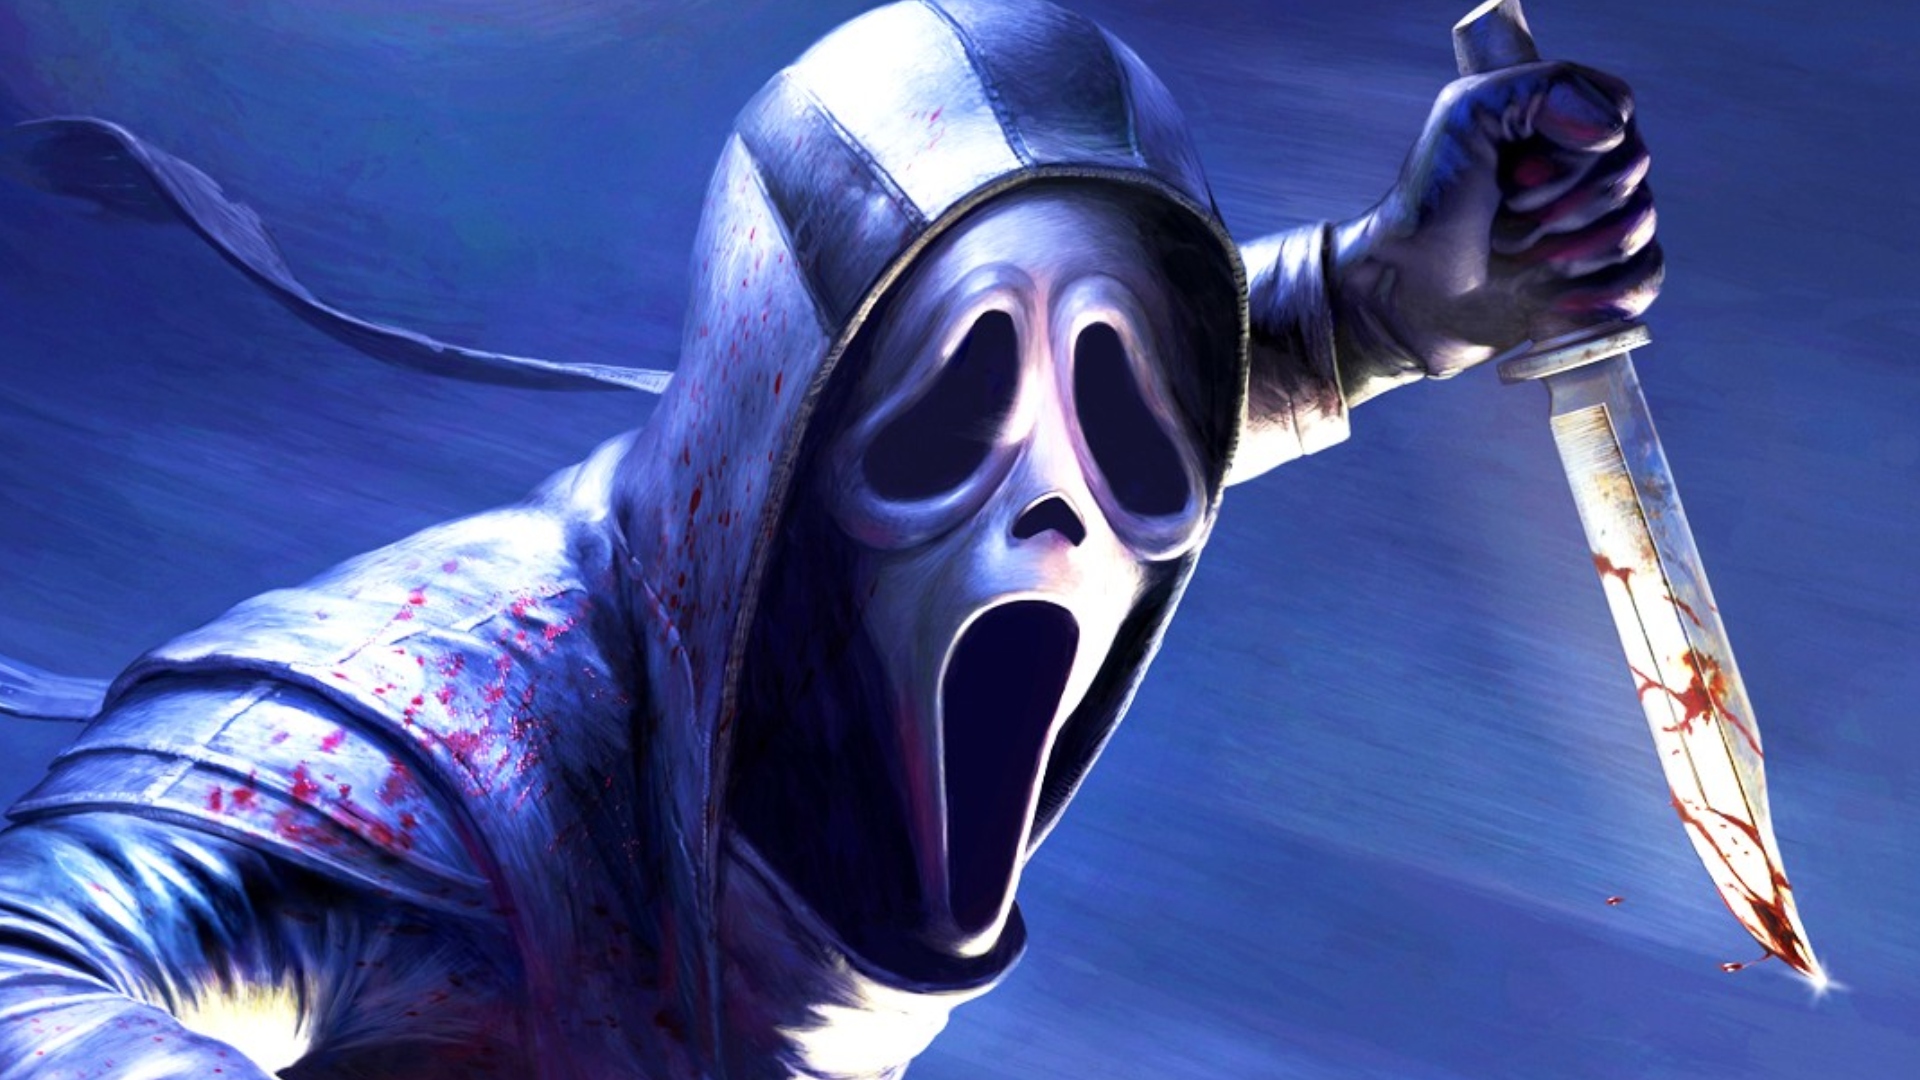 Dead by Daylight's new terror radius is a big boost for accessibility